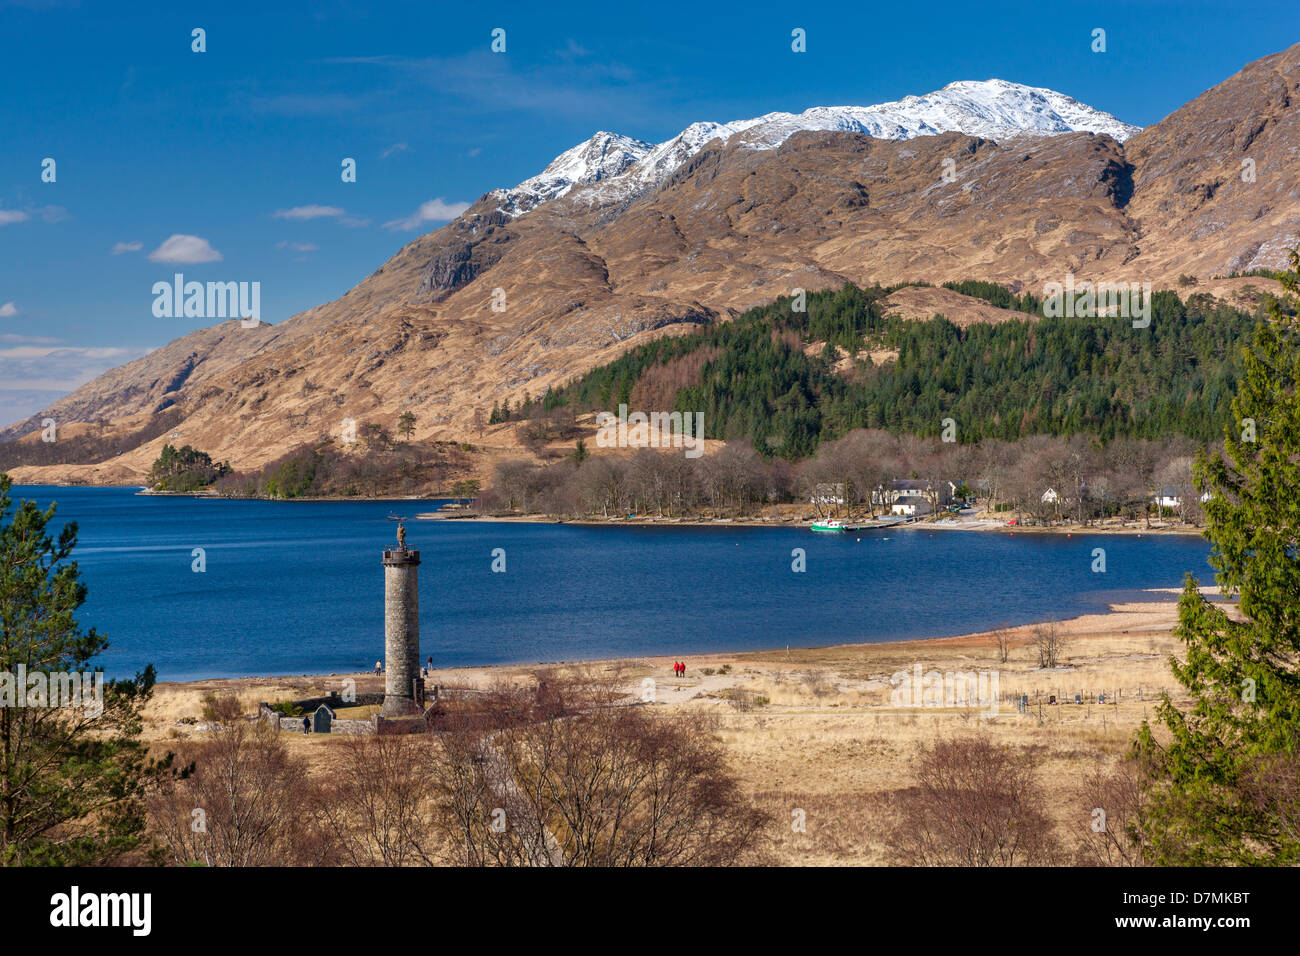 The Glenfinnan Monument situated at the head of Loch Shiel, Highland, Glenfinnan, Scotland, UK, Europe. Stock Photo